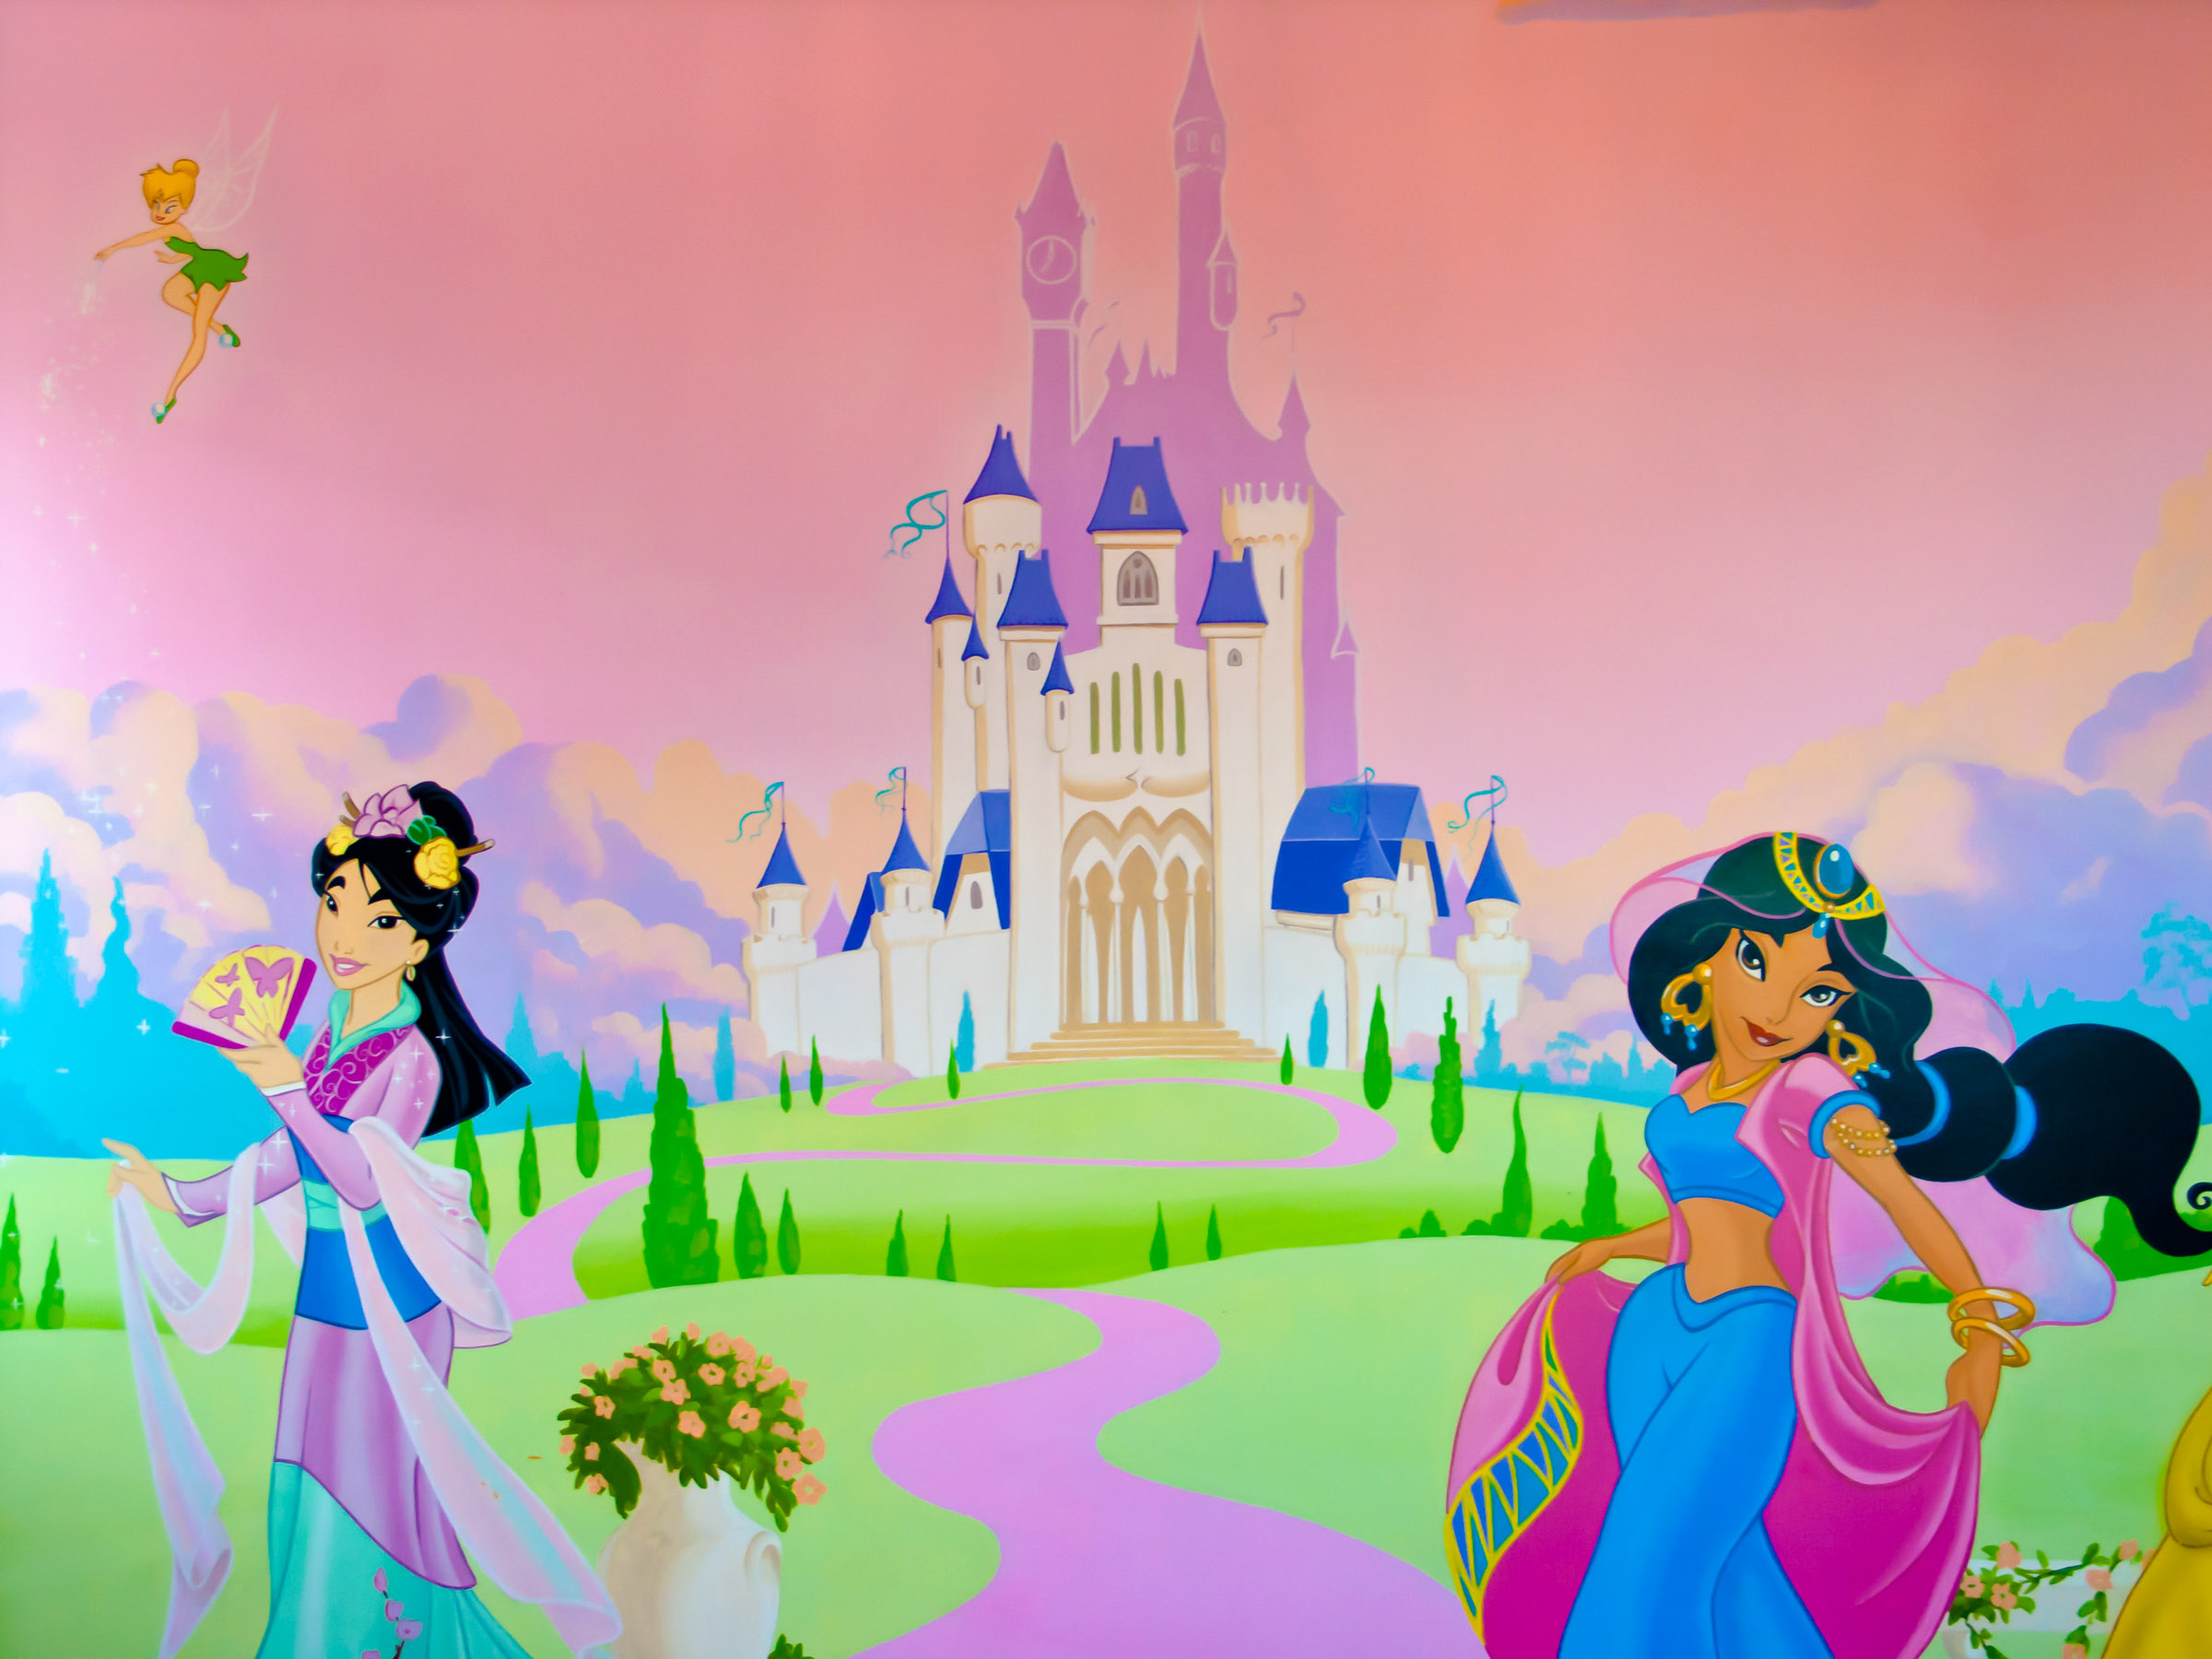 Disney Style Castle, painted relatively simply and quickly to keep costs down.